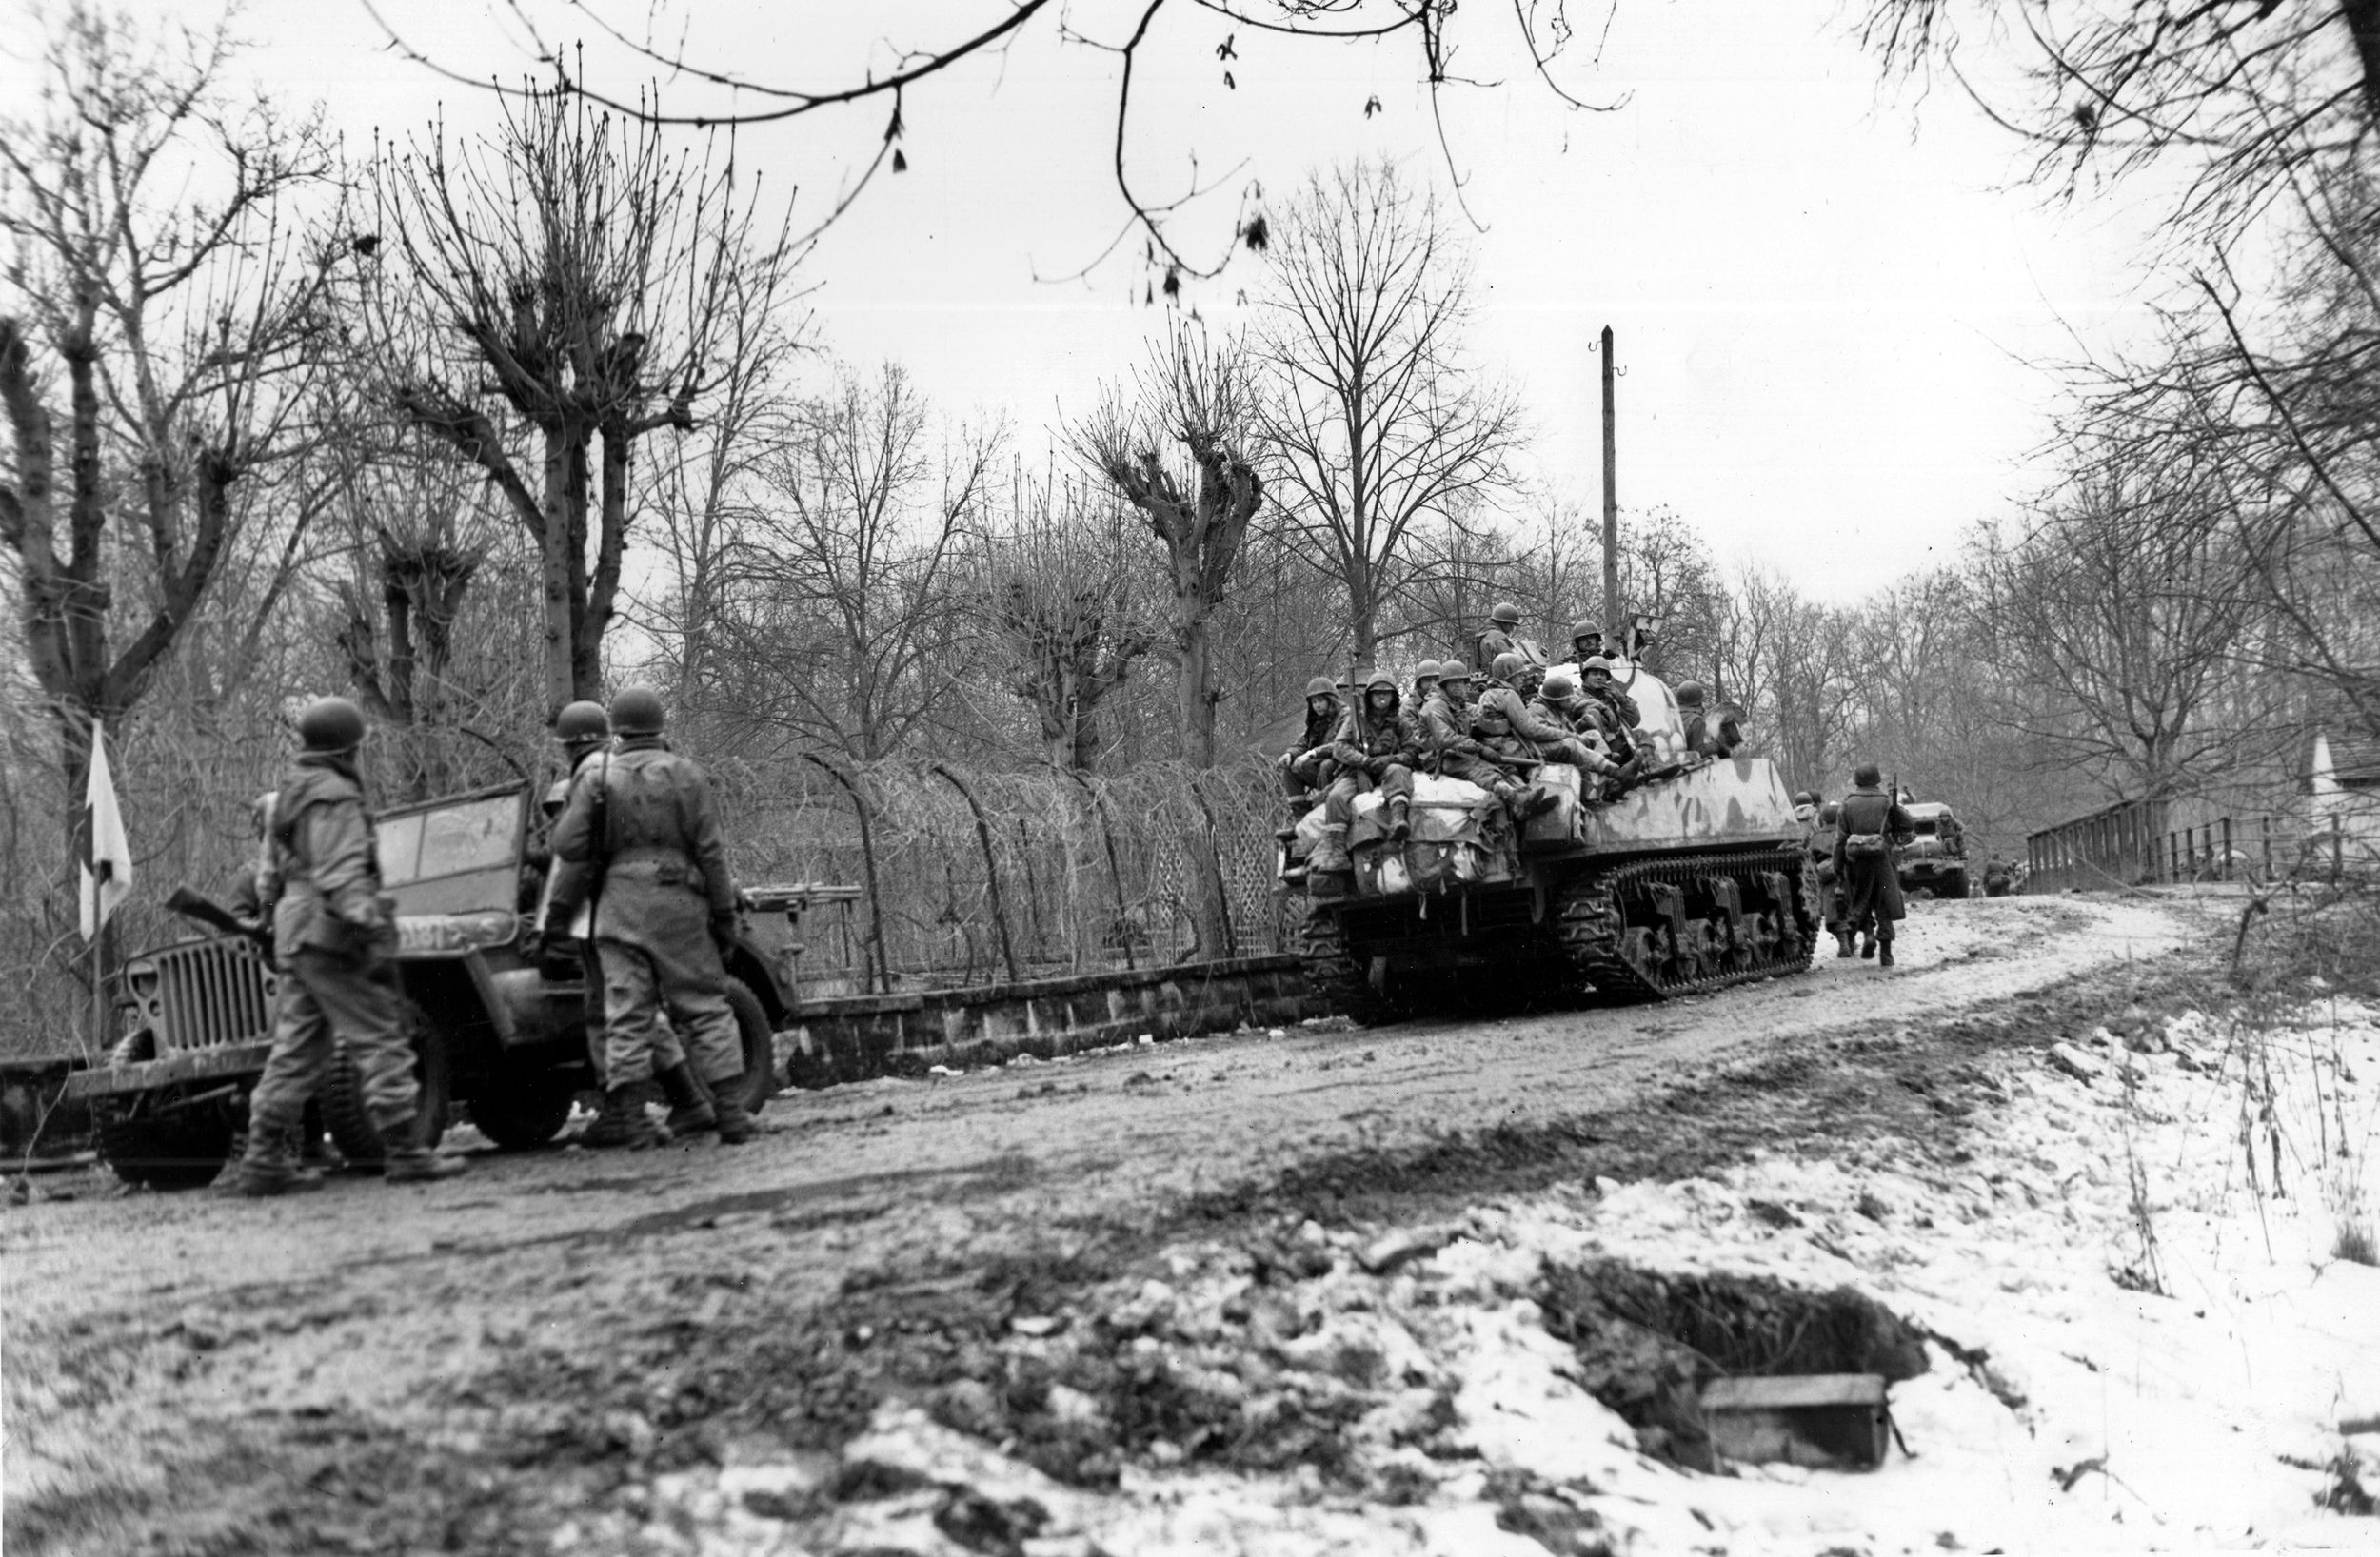 The U.S. XXI corps received reinforcements that included the U.S. 12th Armored Division, which pushed south in early February 1945 to cut off the retreating 
Germans and link up with the French I Corps advancing north